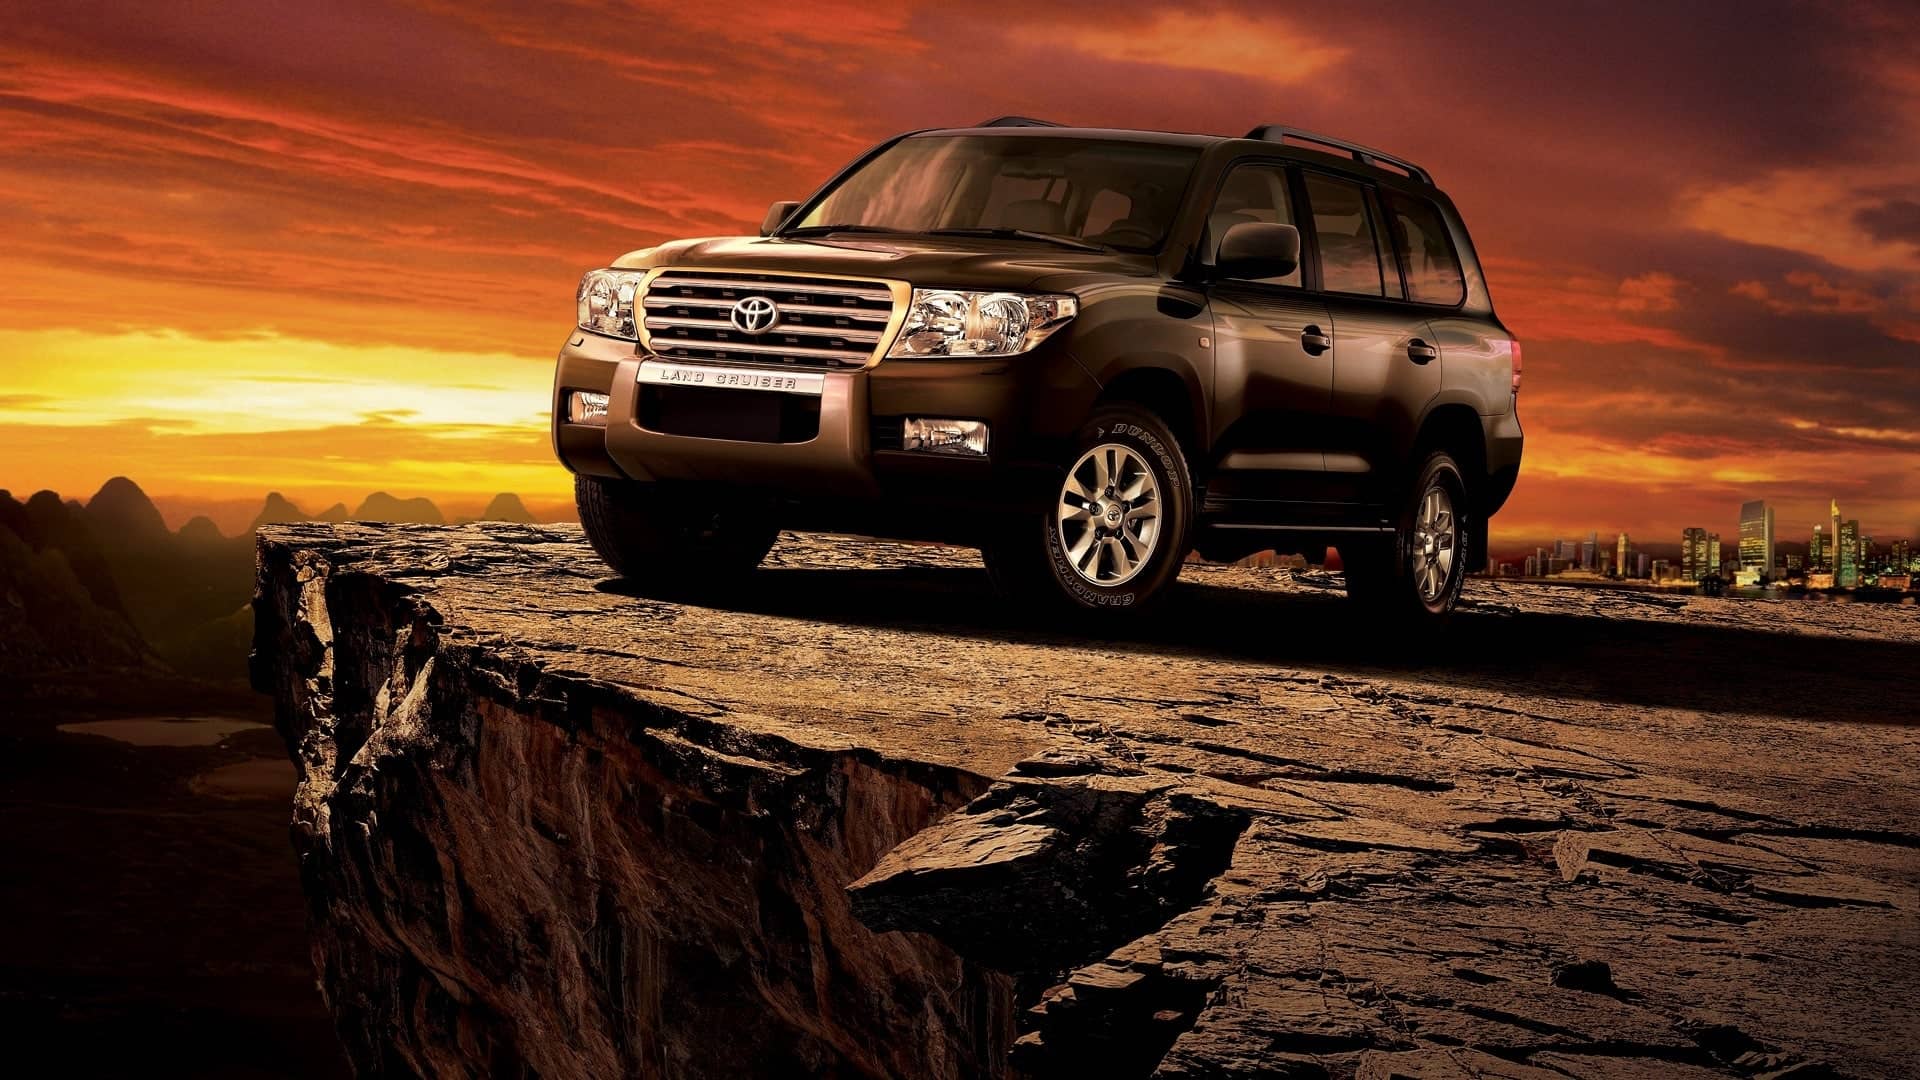 Unraveling the Mystery: Why is Land Cruiser So Expensive?